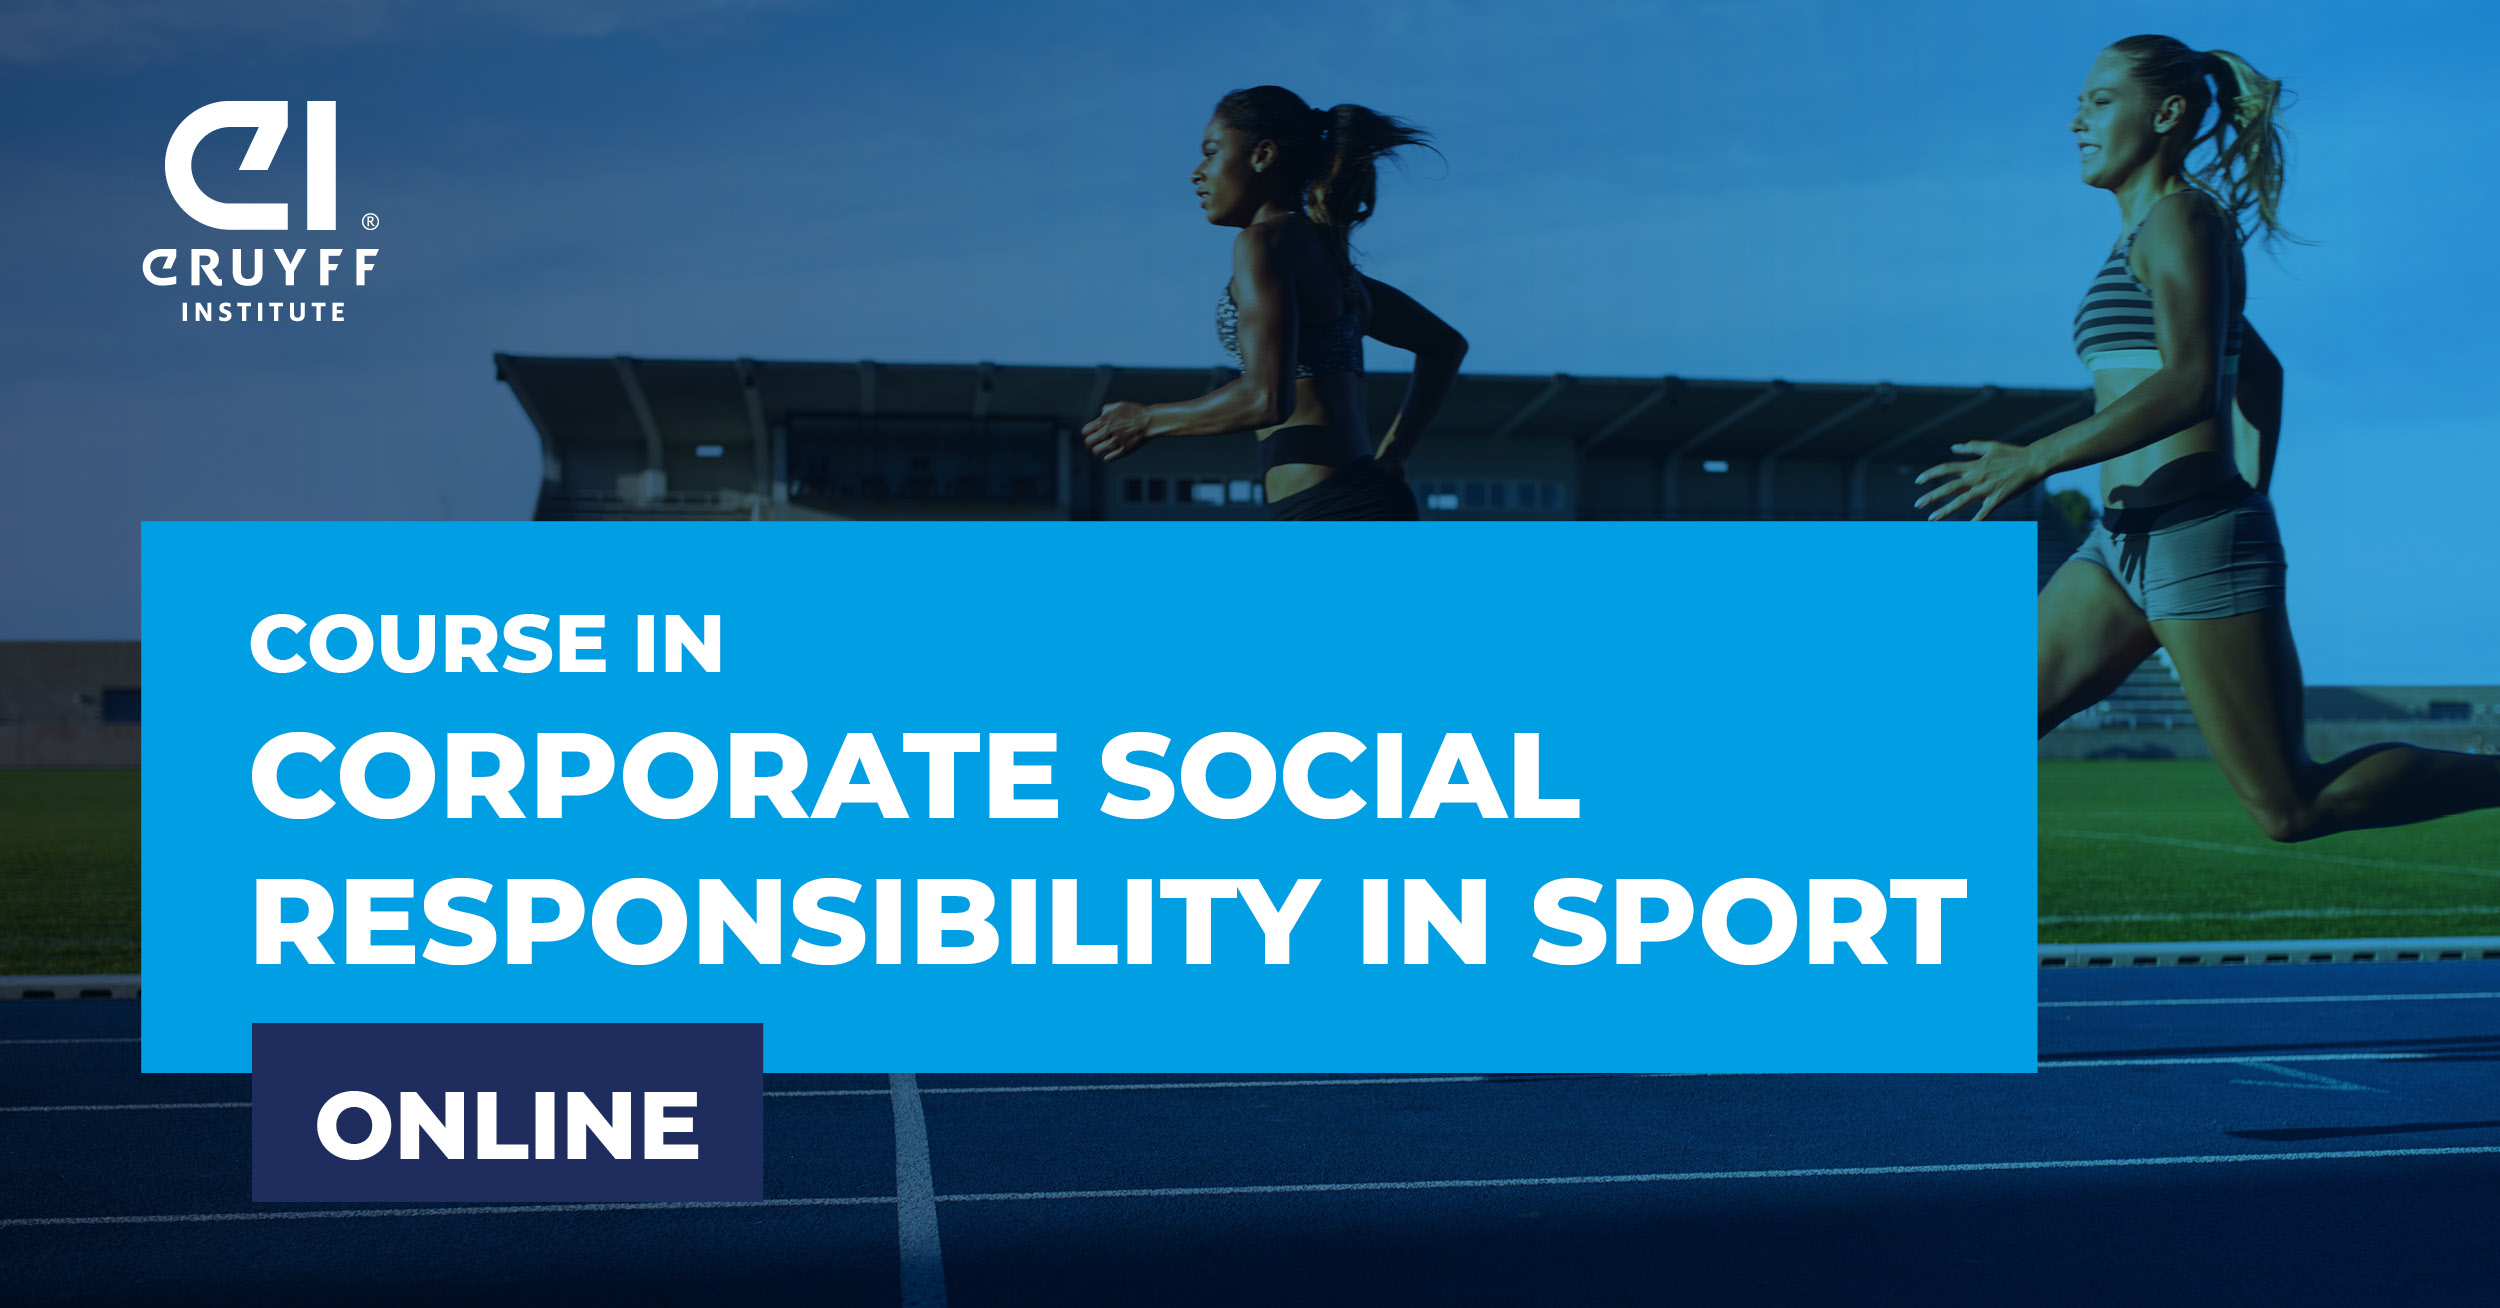 Course in Corporate Social Responsibility in Sport Online - Johan